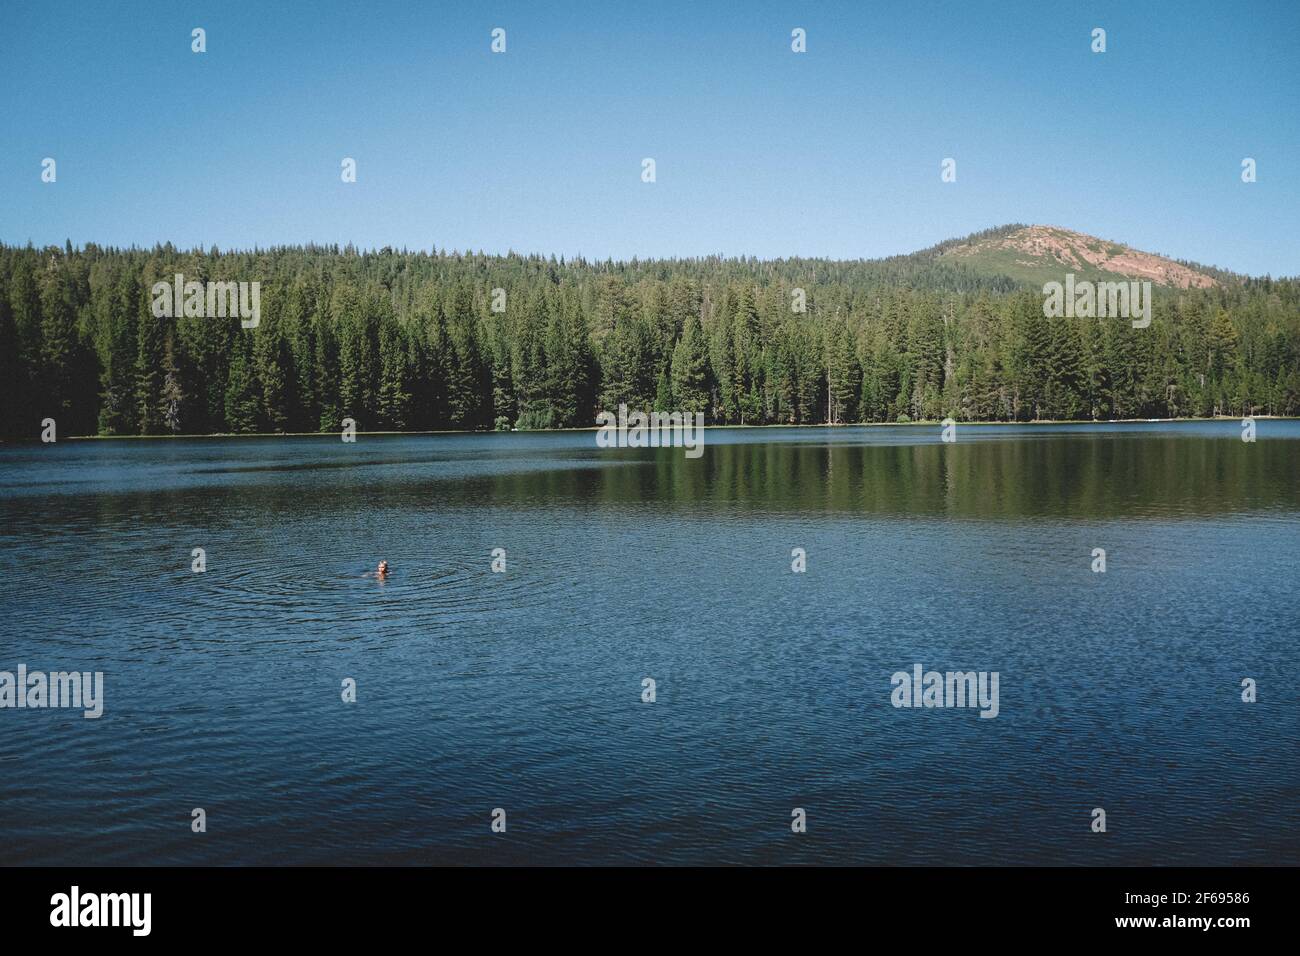 Distant View of Boy Treading Water in the Center of a Scenic Lake Stock Photo